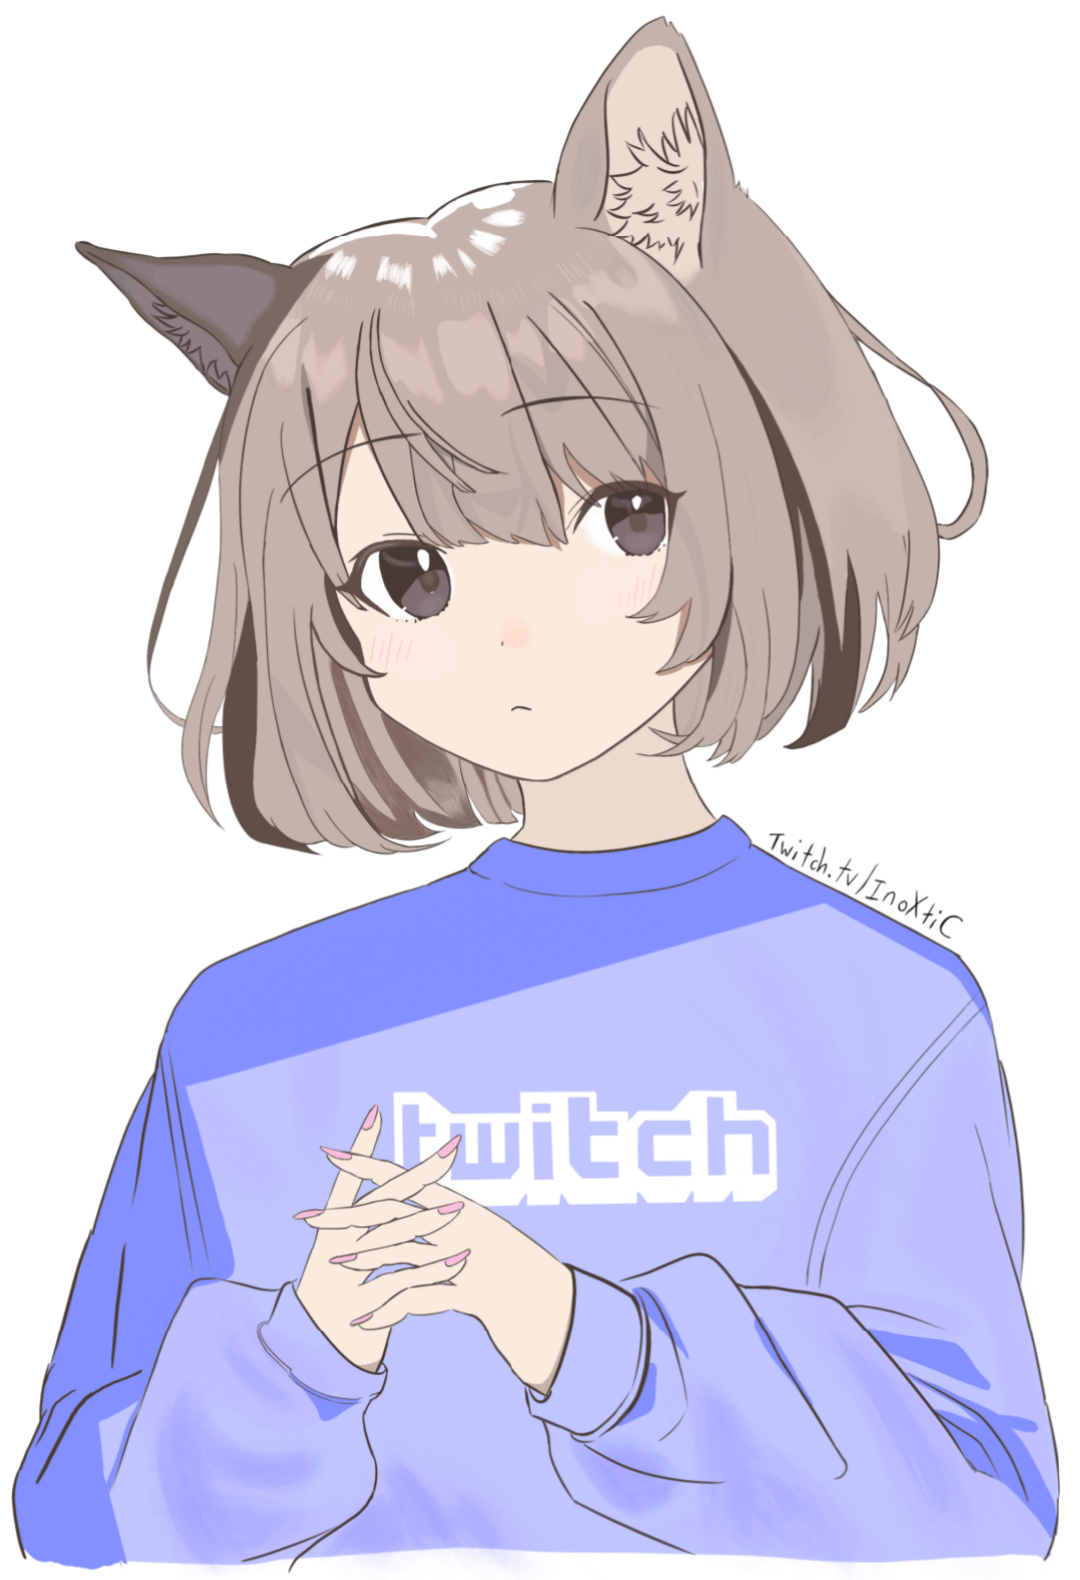 Twitch-Chan coming through. :)